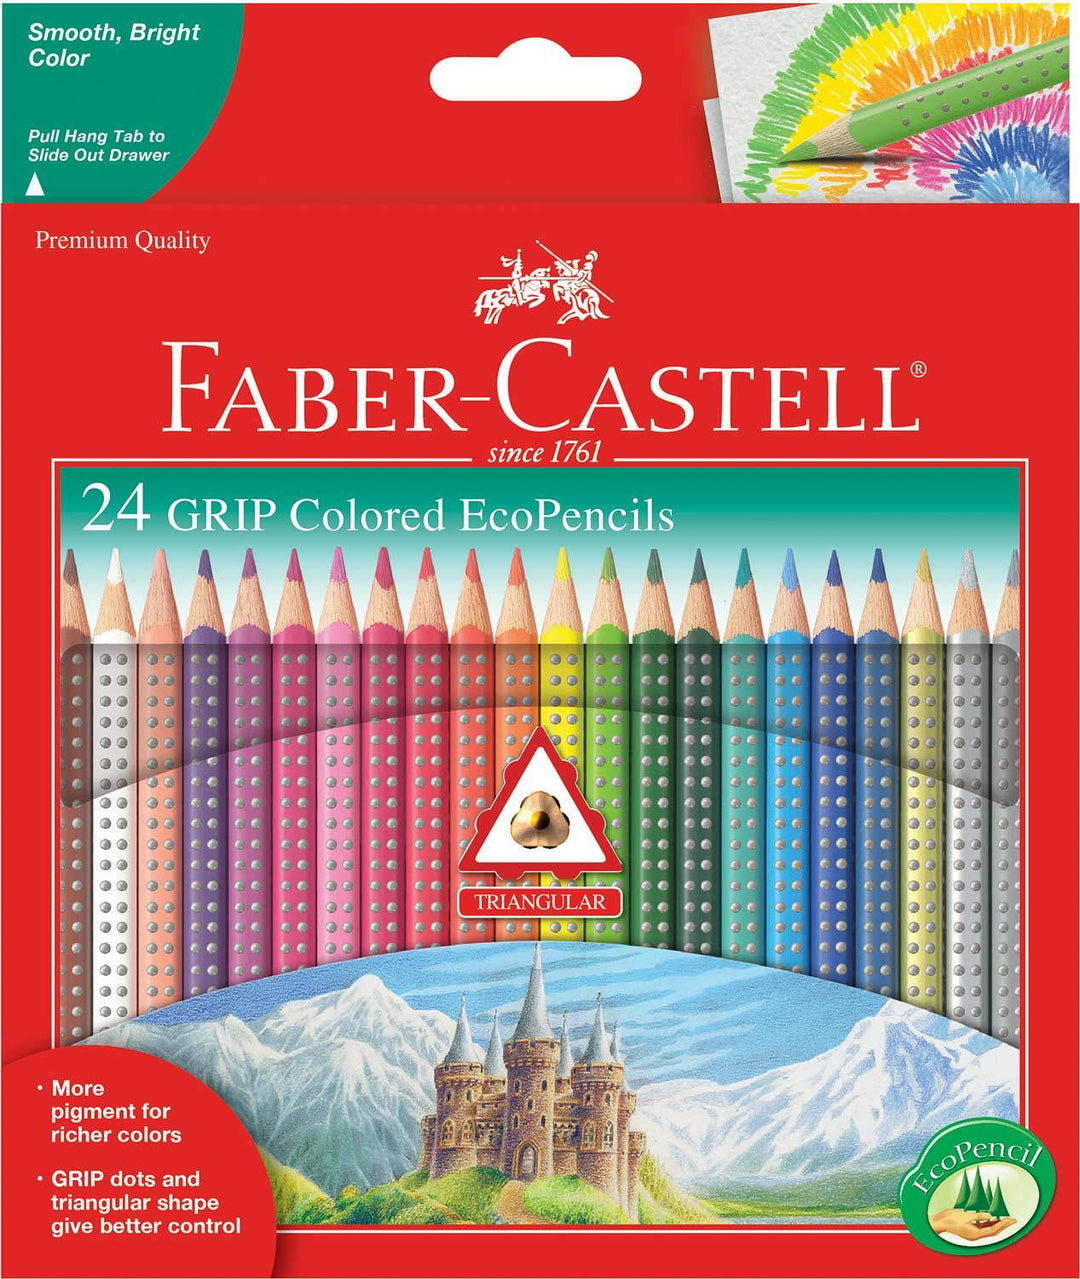 Faber-Castell / Creativity for Kids Arts & Crafts 24ct Grip Colored EcoPencils